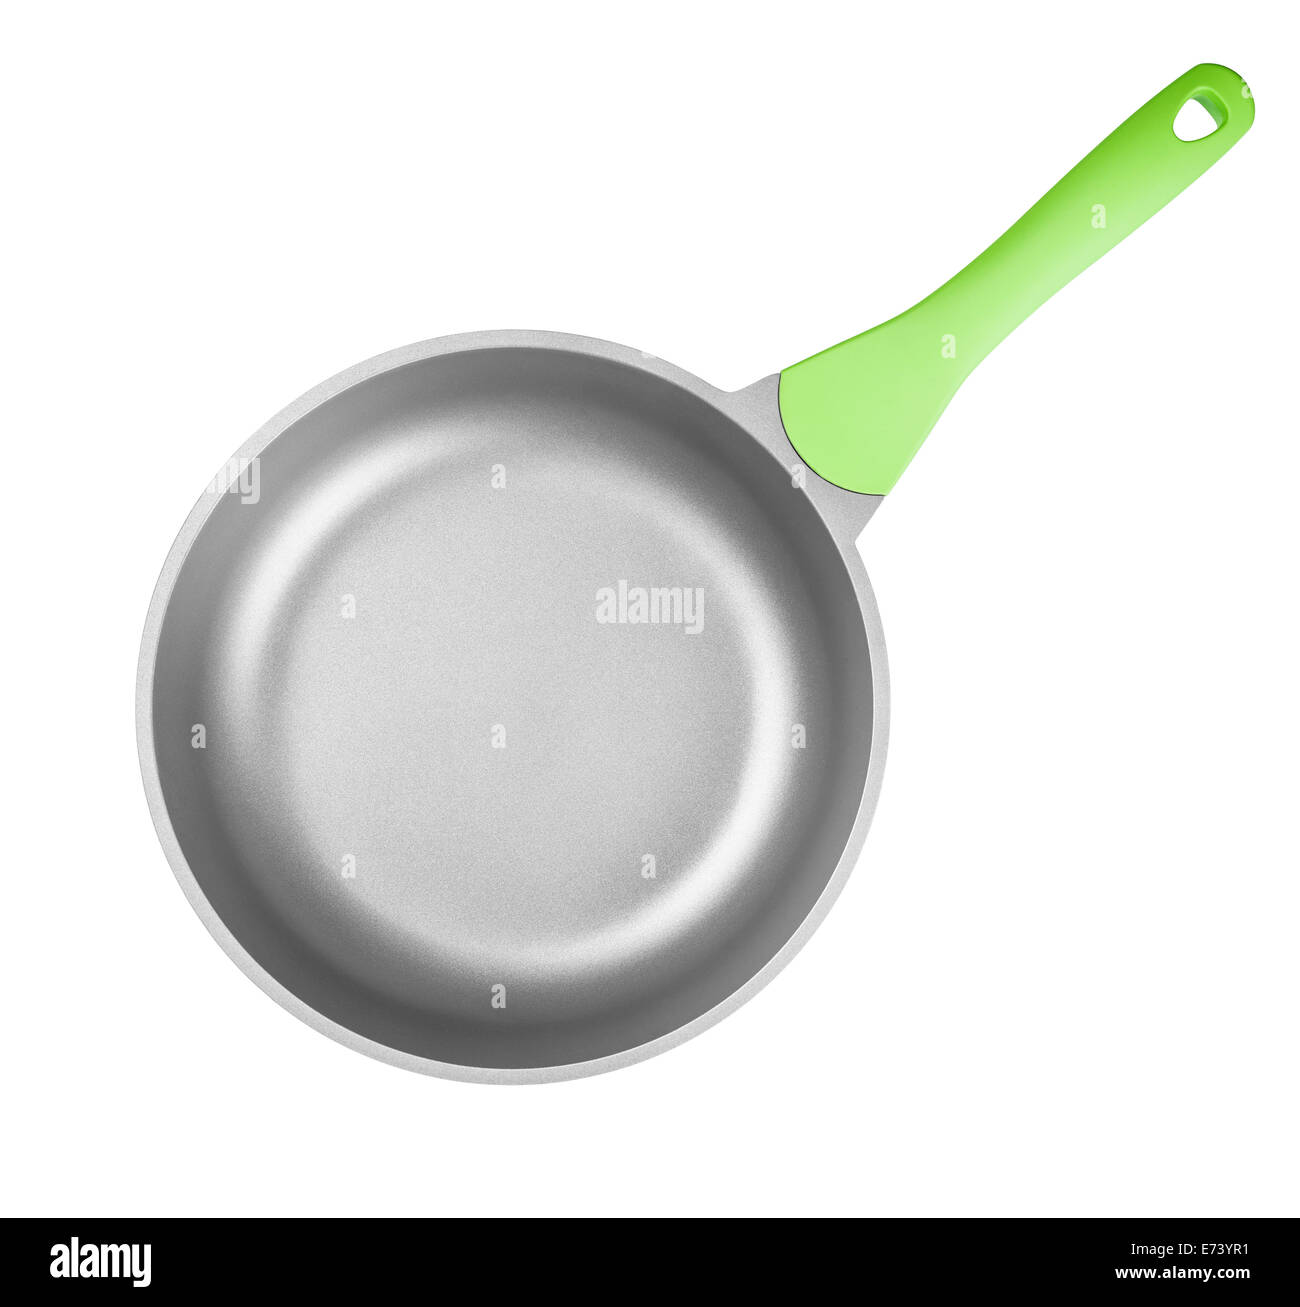 Frying pan or skillet top view isolated on white with clipping path included Stock Photo